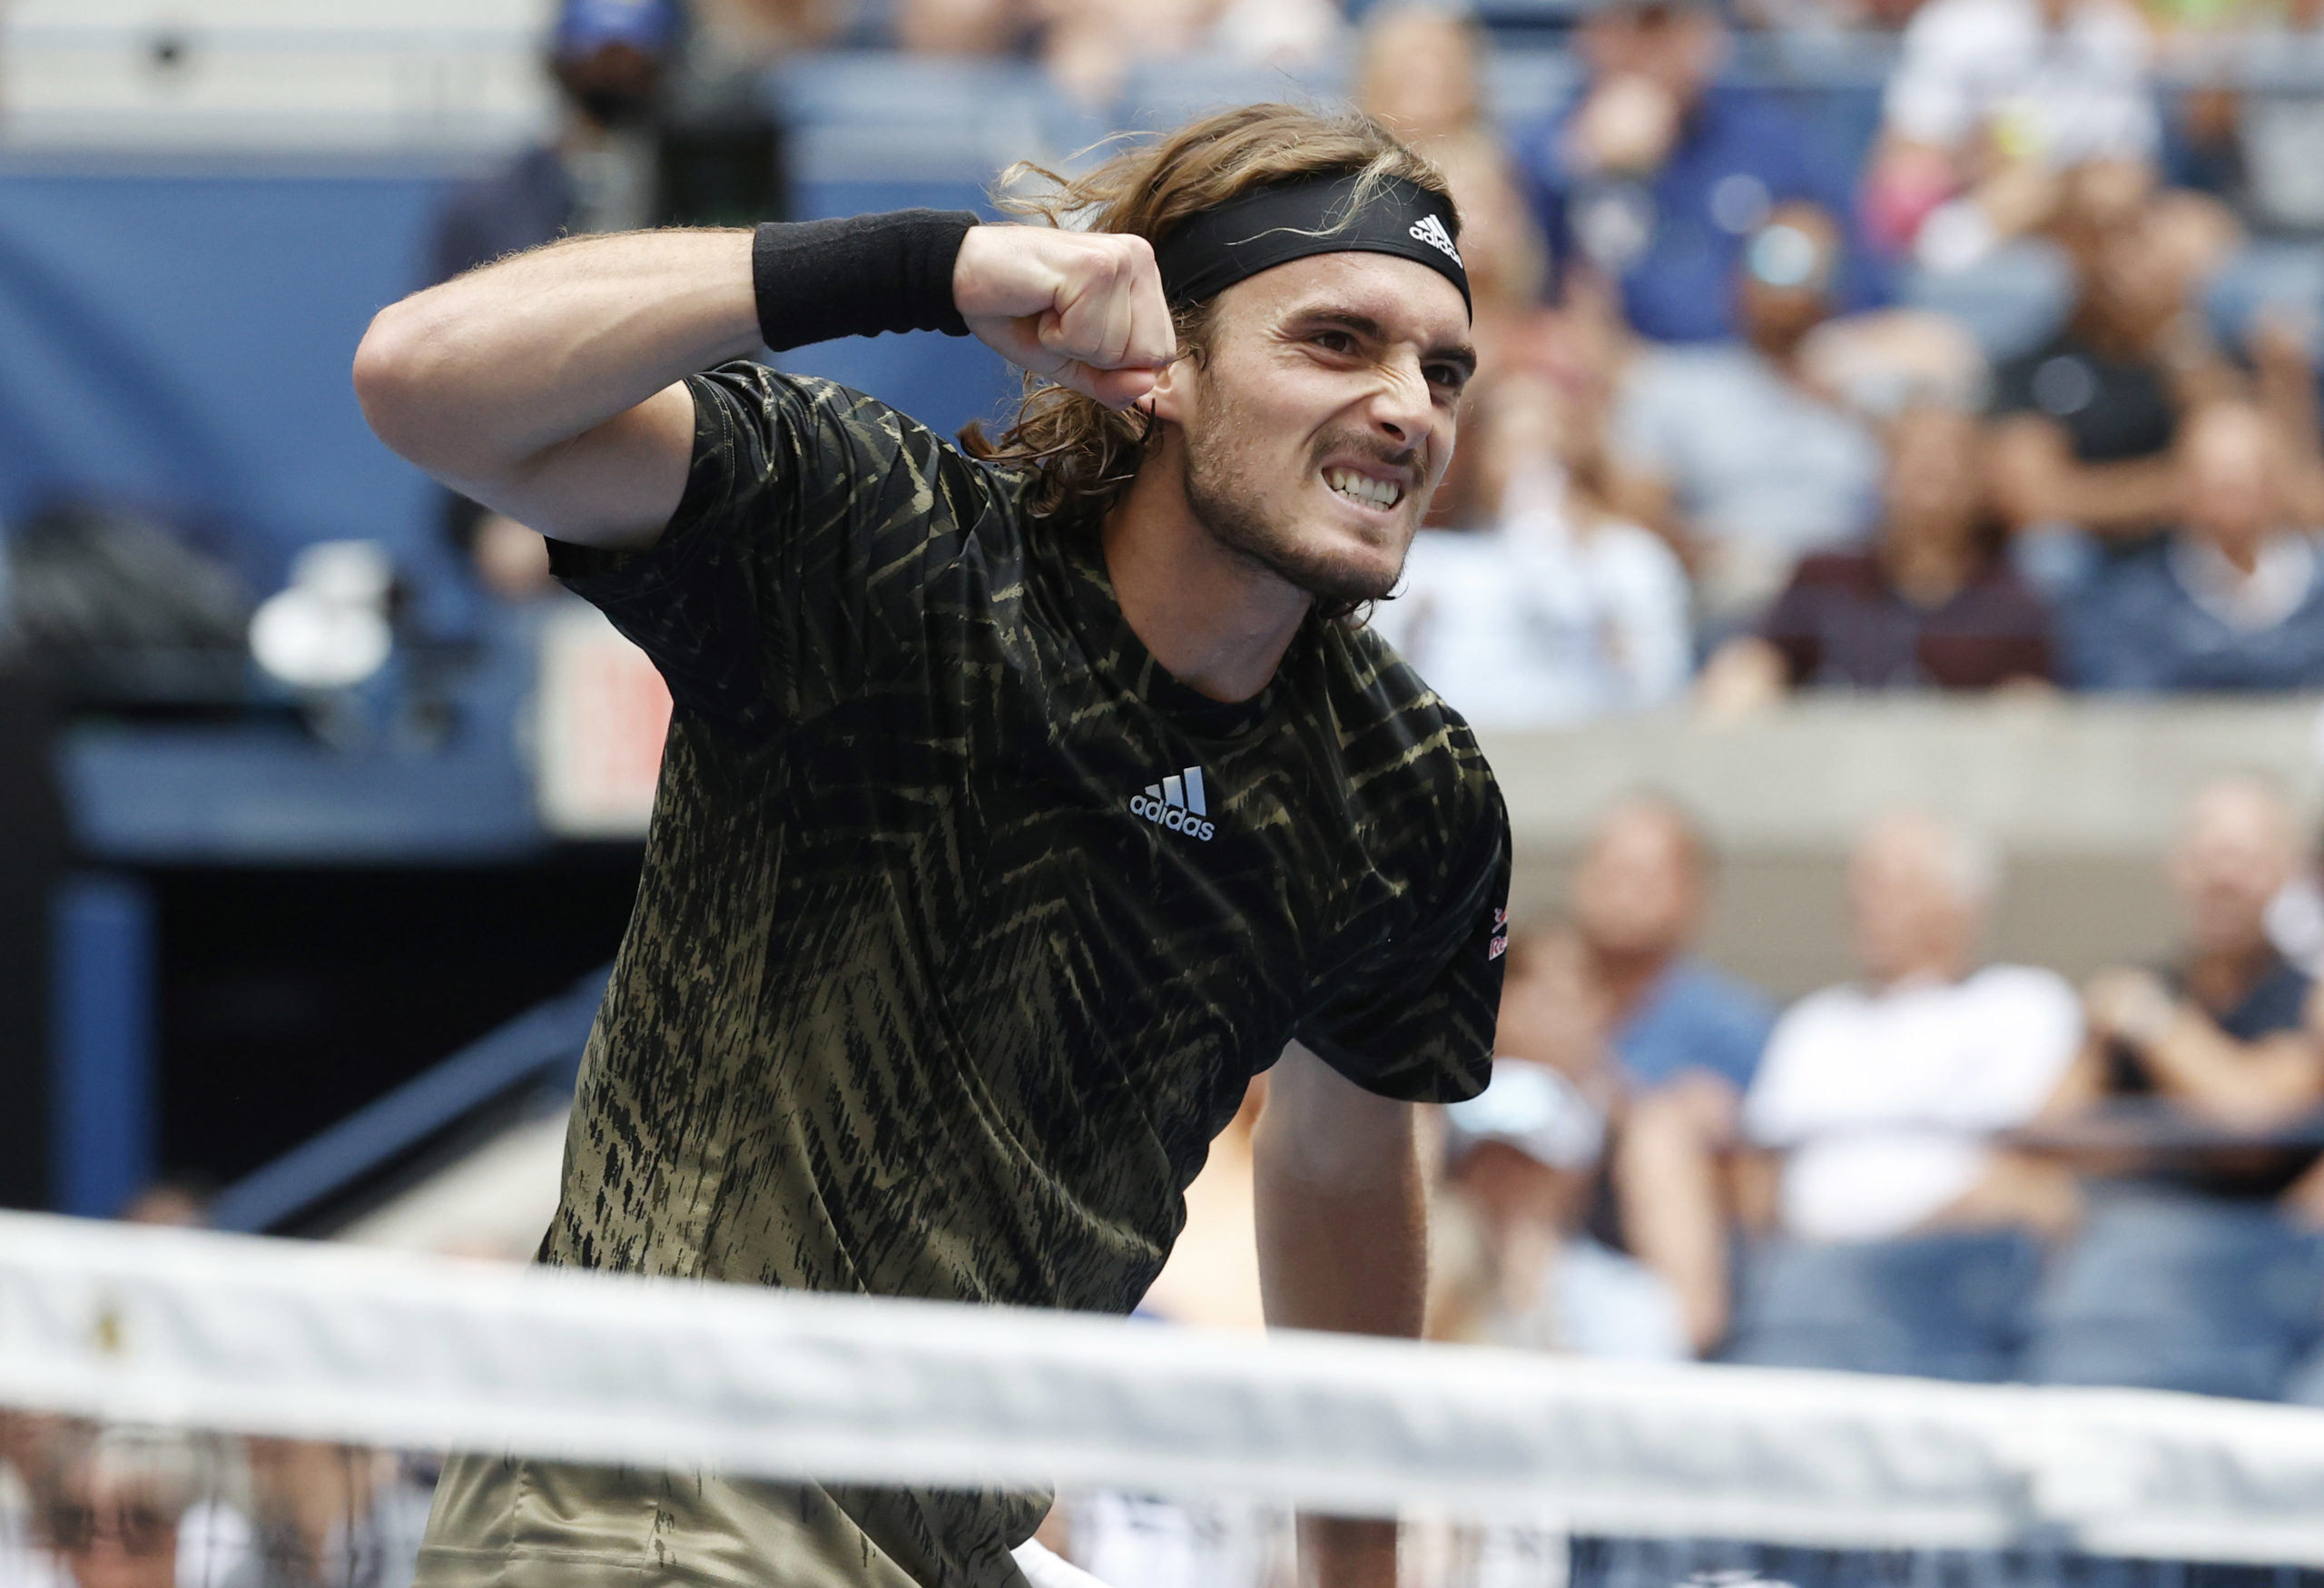  Stefanos Tsitsipas of Greece celebrates after winning a point against Carlos Alcaraz of Spain in a third round match on day five of the 2021 U.S. Open tennis tournament at USTA Billie Jean King National Tennis Center